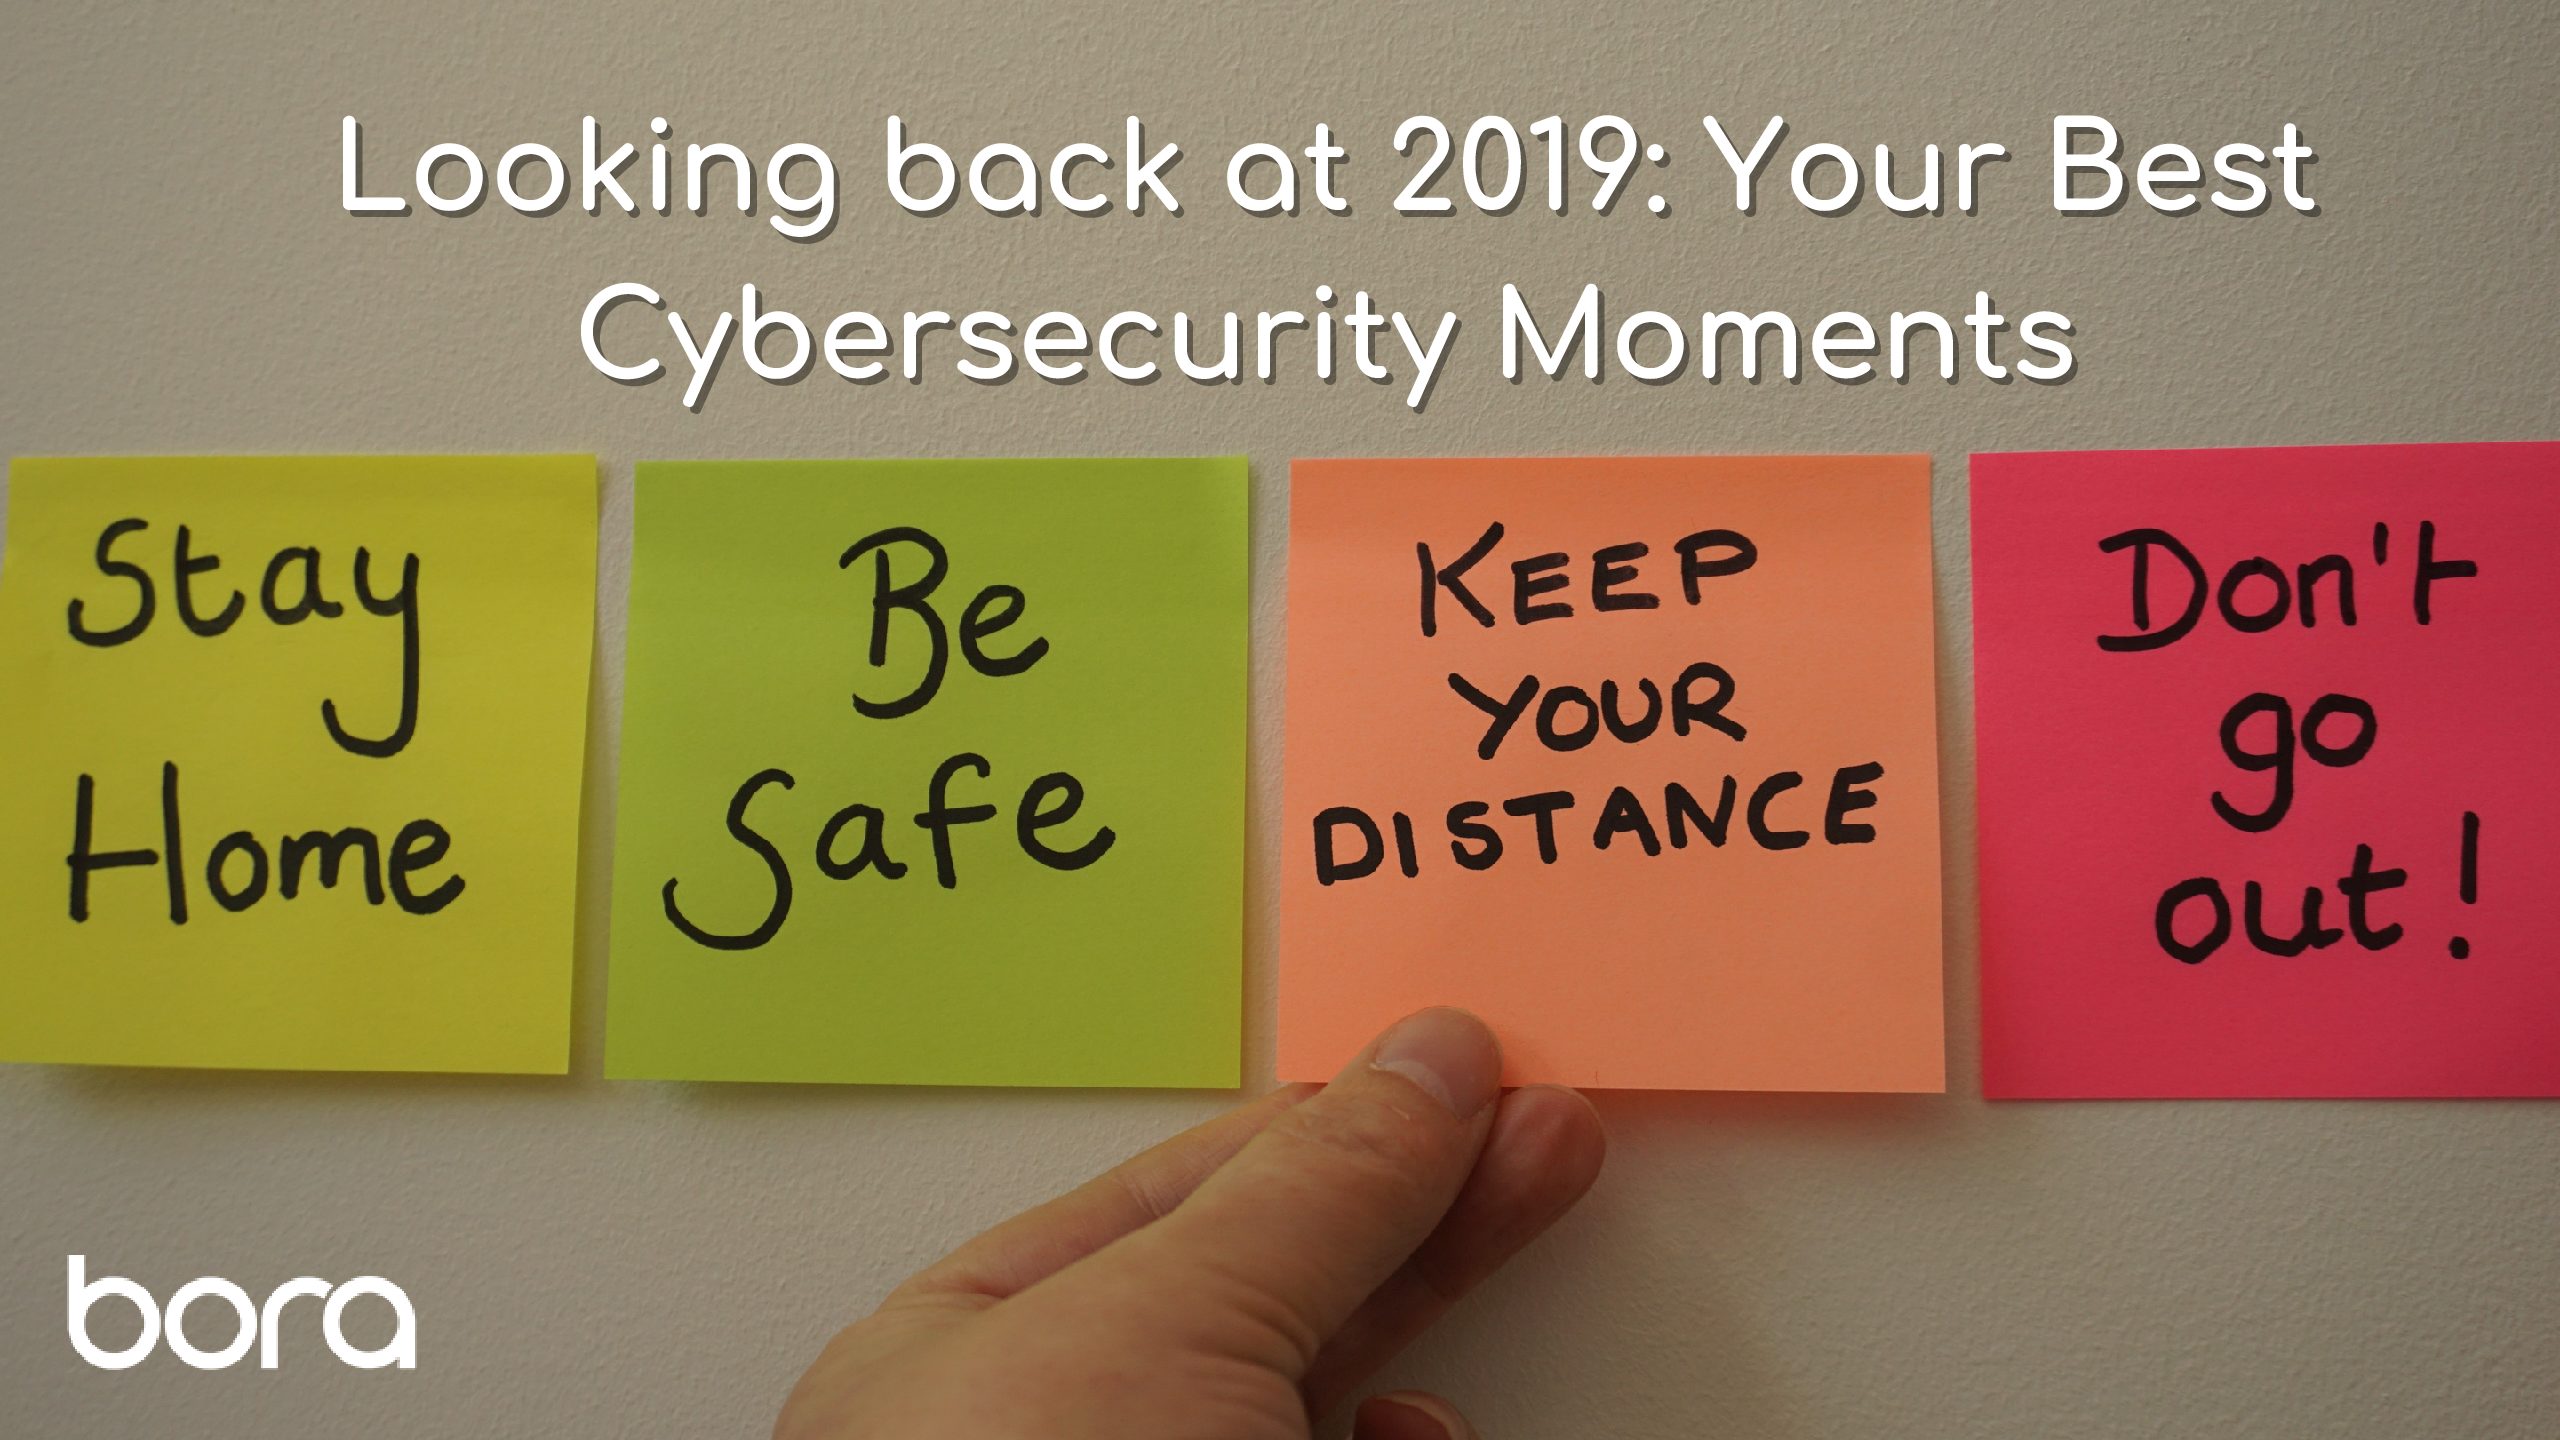 Looking back at 2019: Your Best Cybersecurity Moments